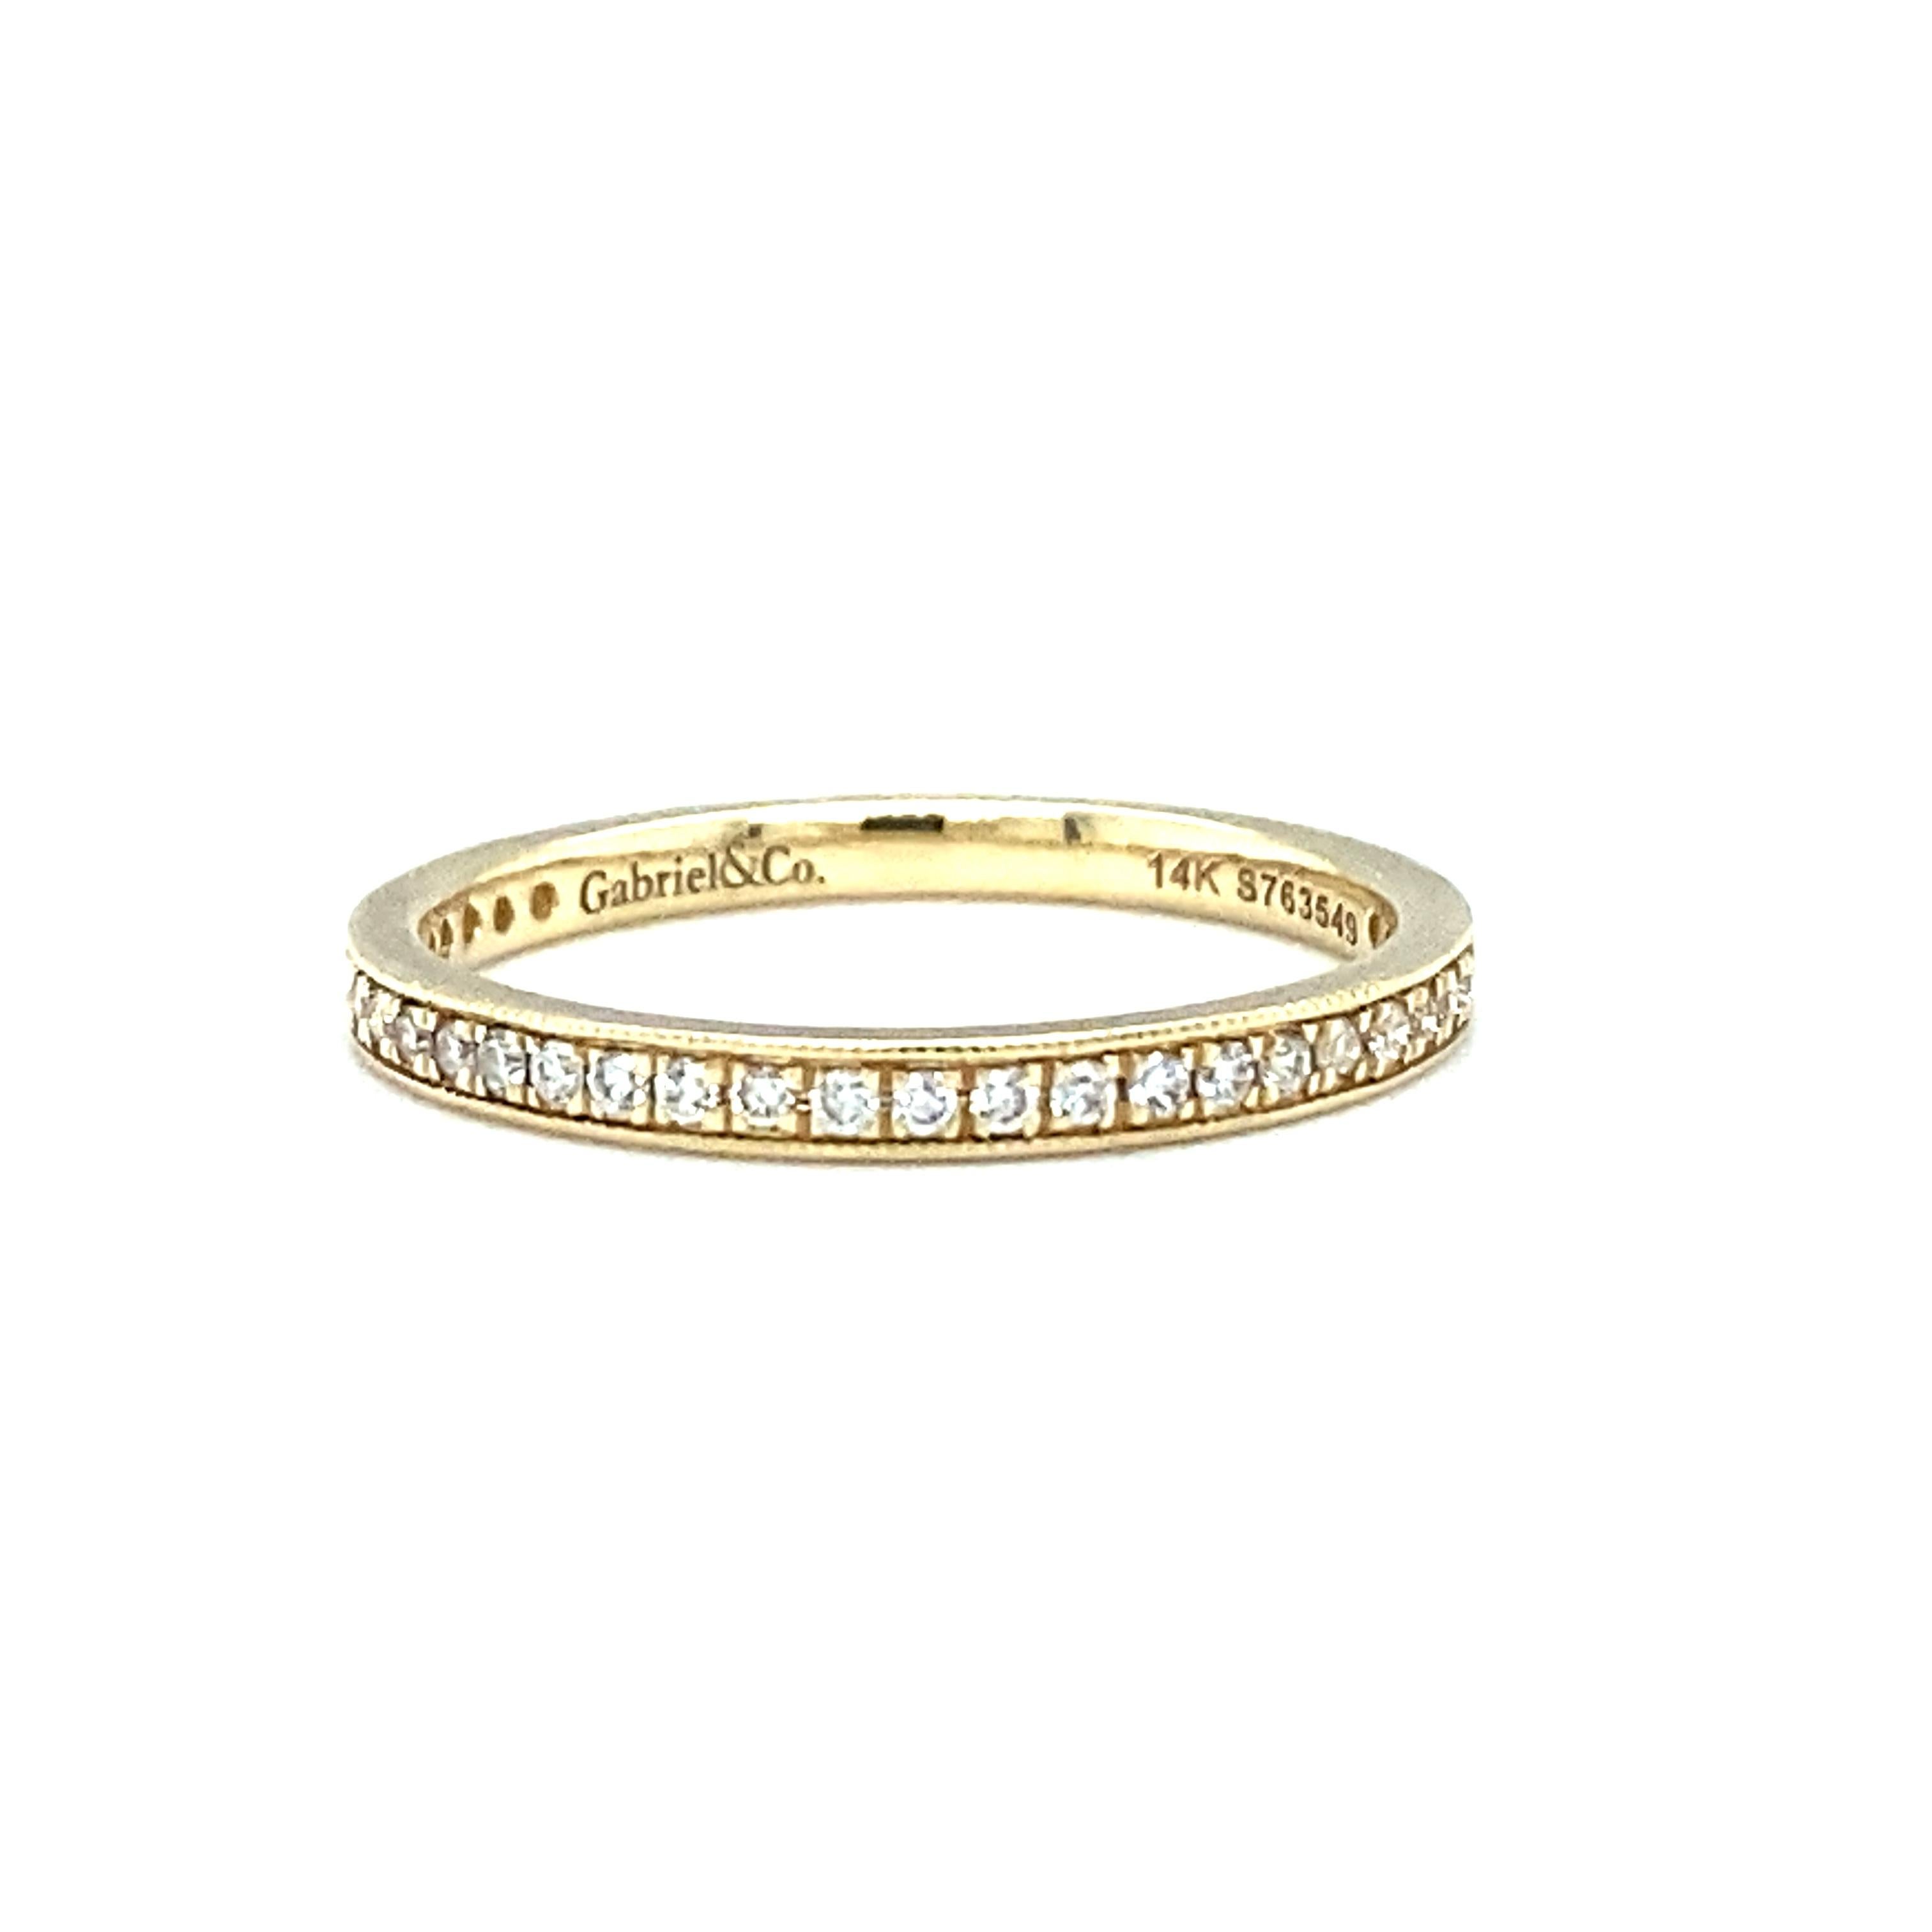 Item Details: This band by Gabriel & Co. has diamonds around almost all of the band, with an empty space making it able to be size adjusted.

Circa: 2000s
Metal Type: 14k yellow gold
Weight: 1 gram
Size: US 4, slightly resizable

Diamond